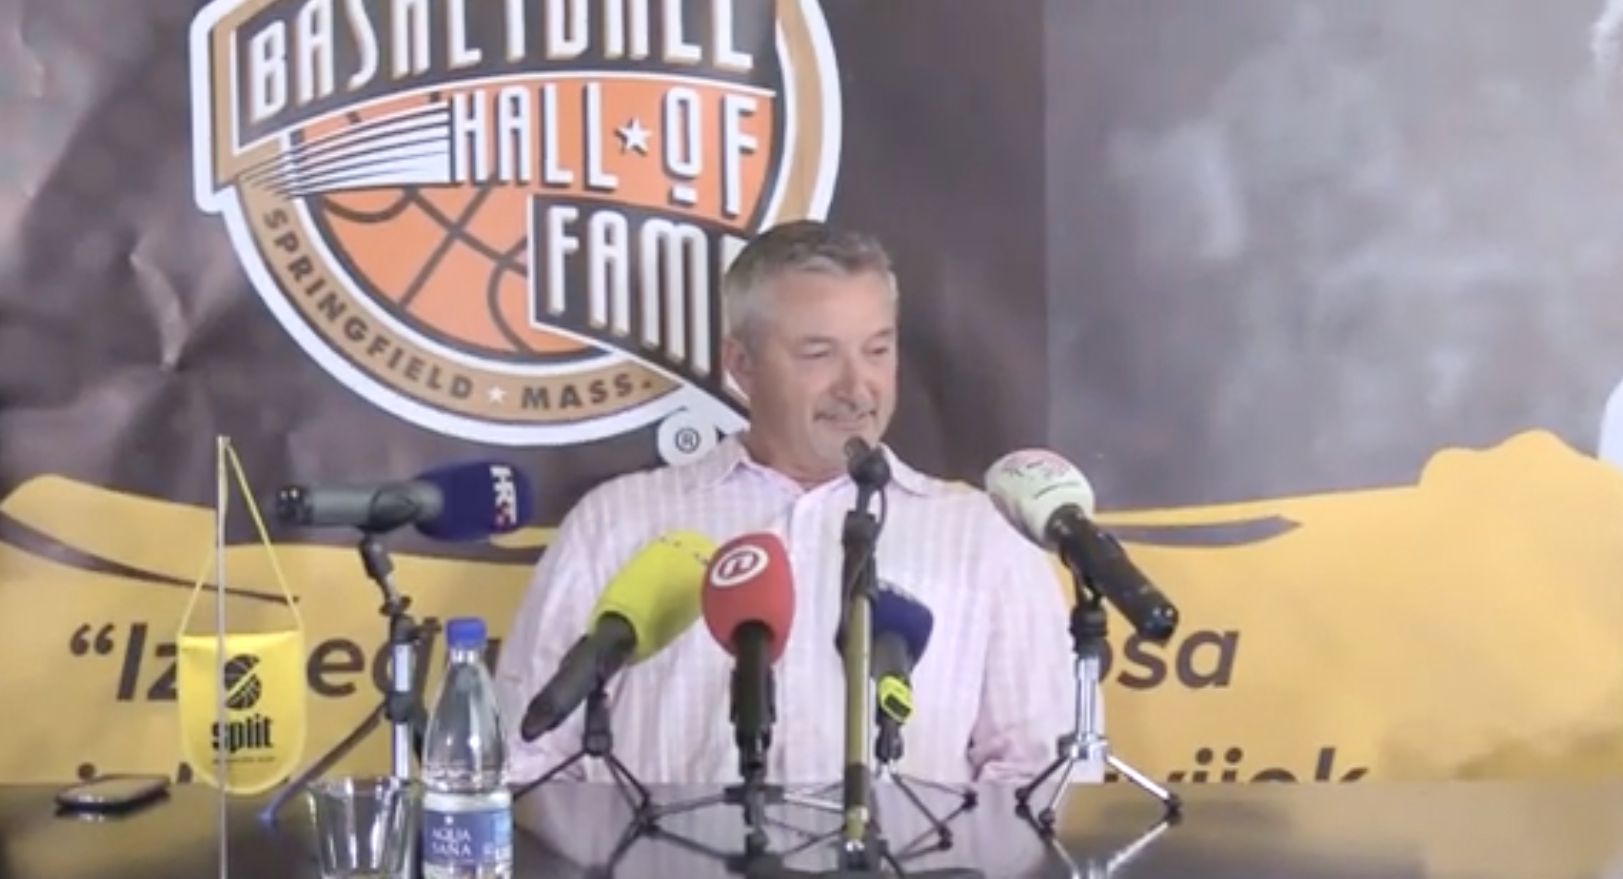 Former Bulls star Toni Kukoc to be inducted into Basketball Hall